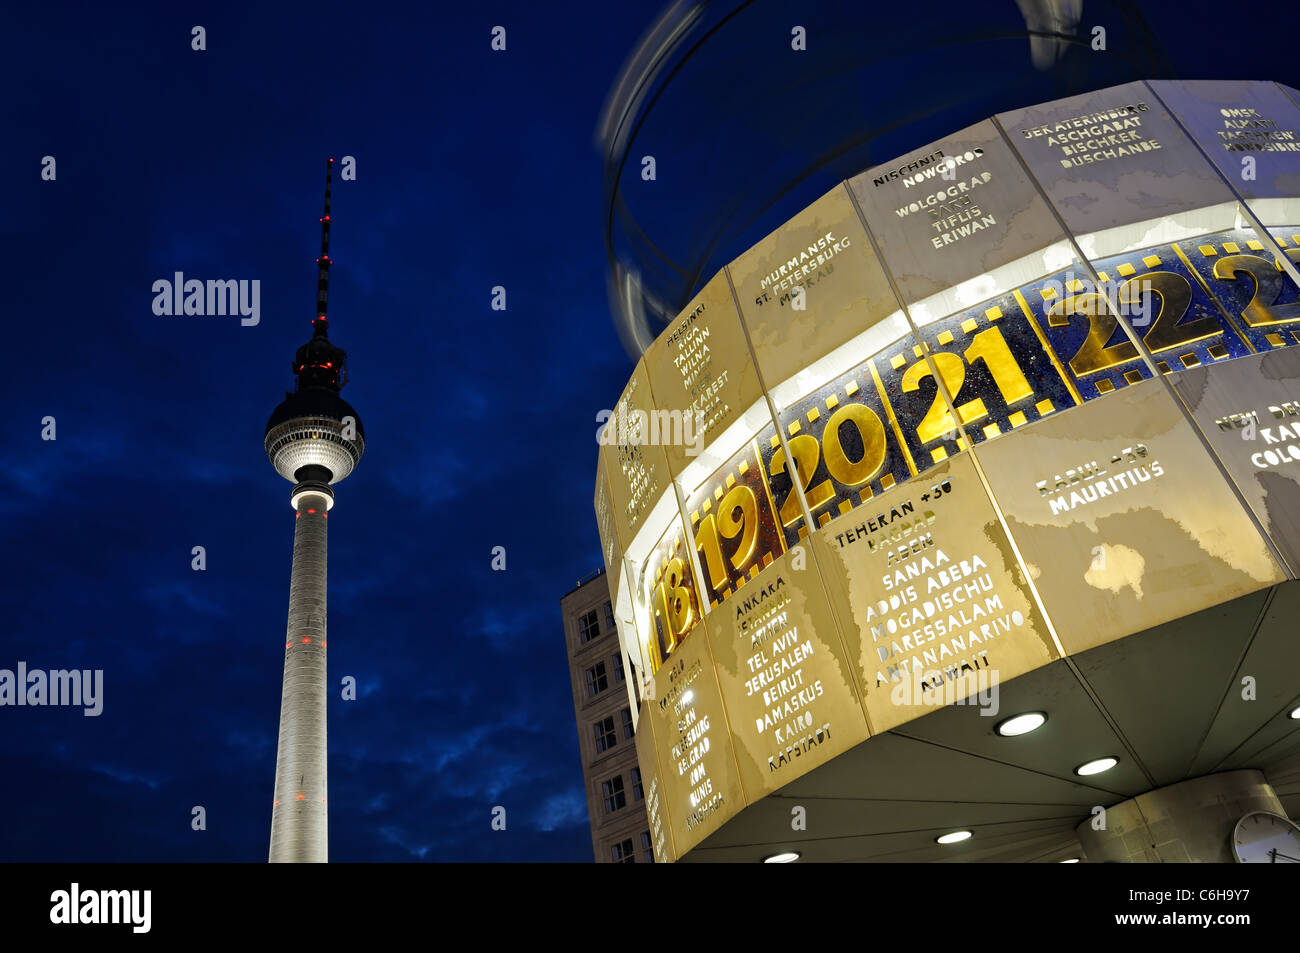 Famous World clock at Alexanderplatz with the TV tower by night, Berlin, Germany. Stock Photo